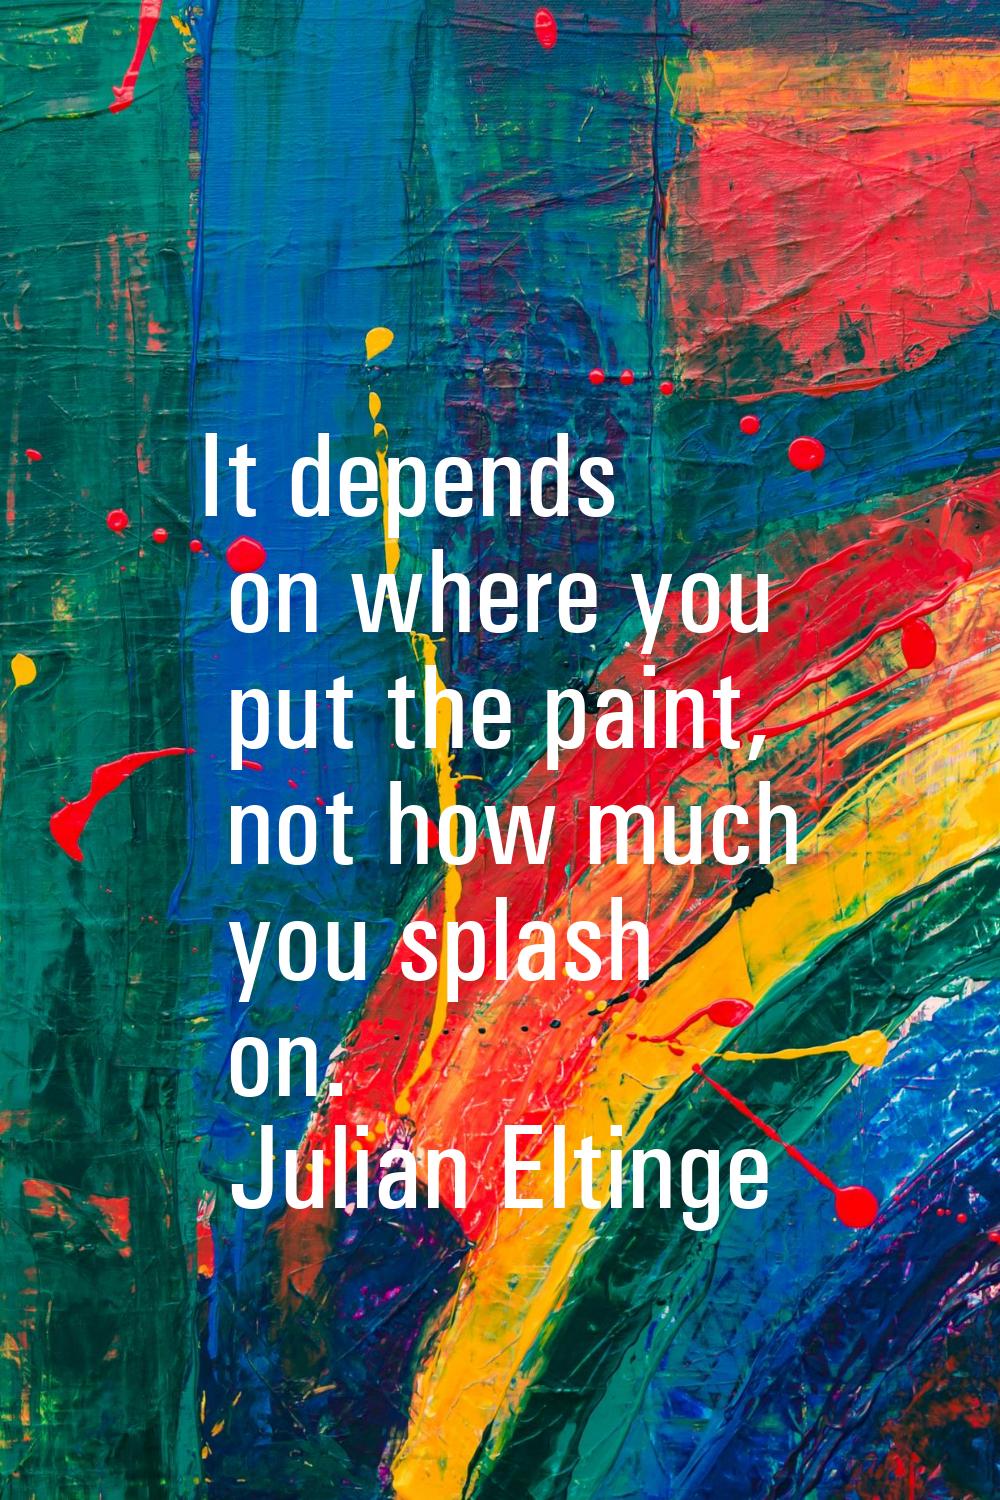 It depends on where you put the paint, not how much you splash on.